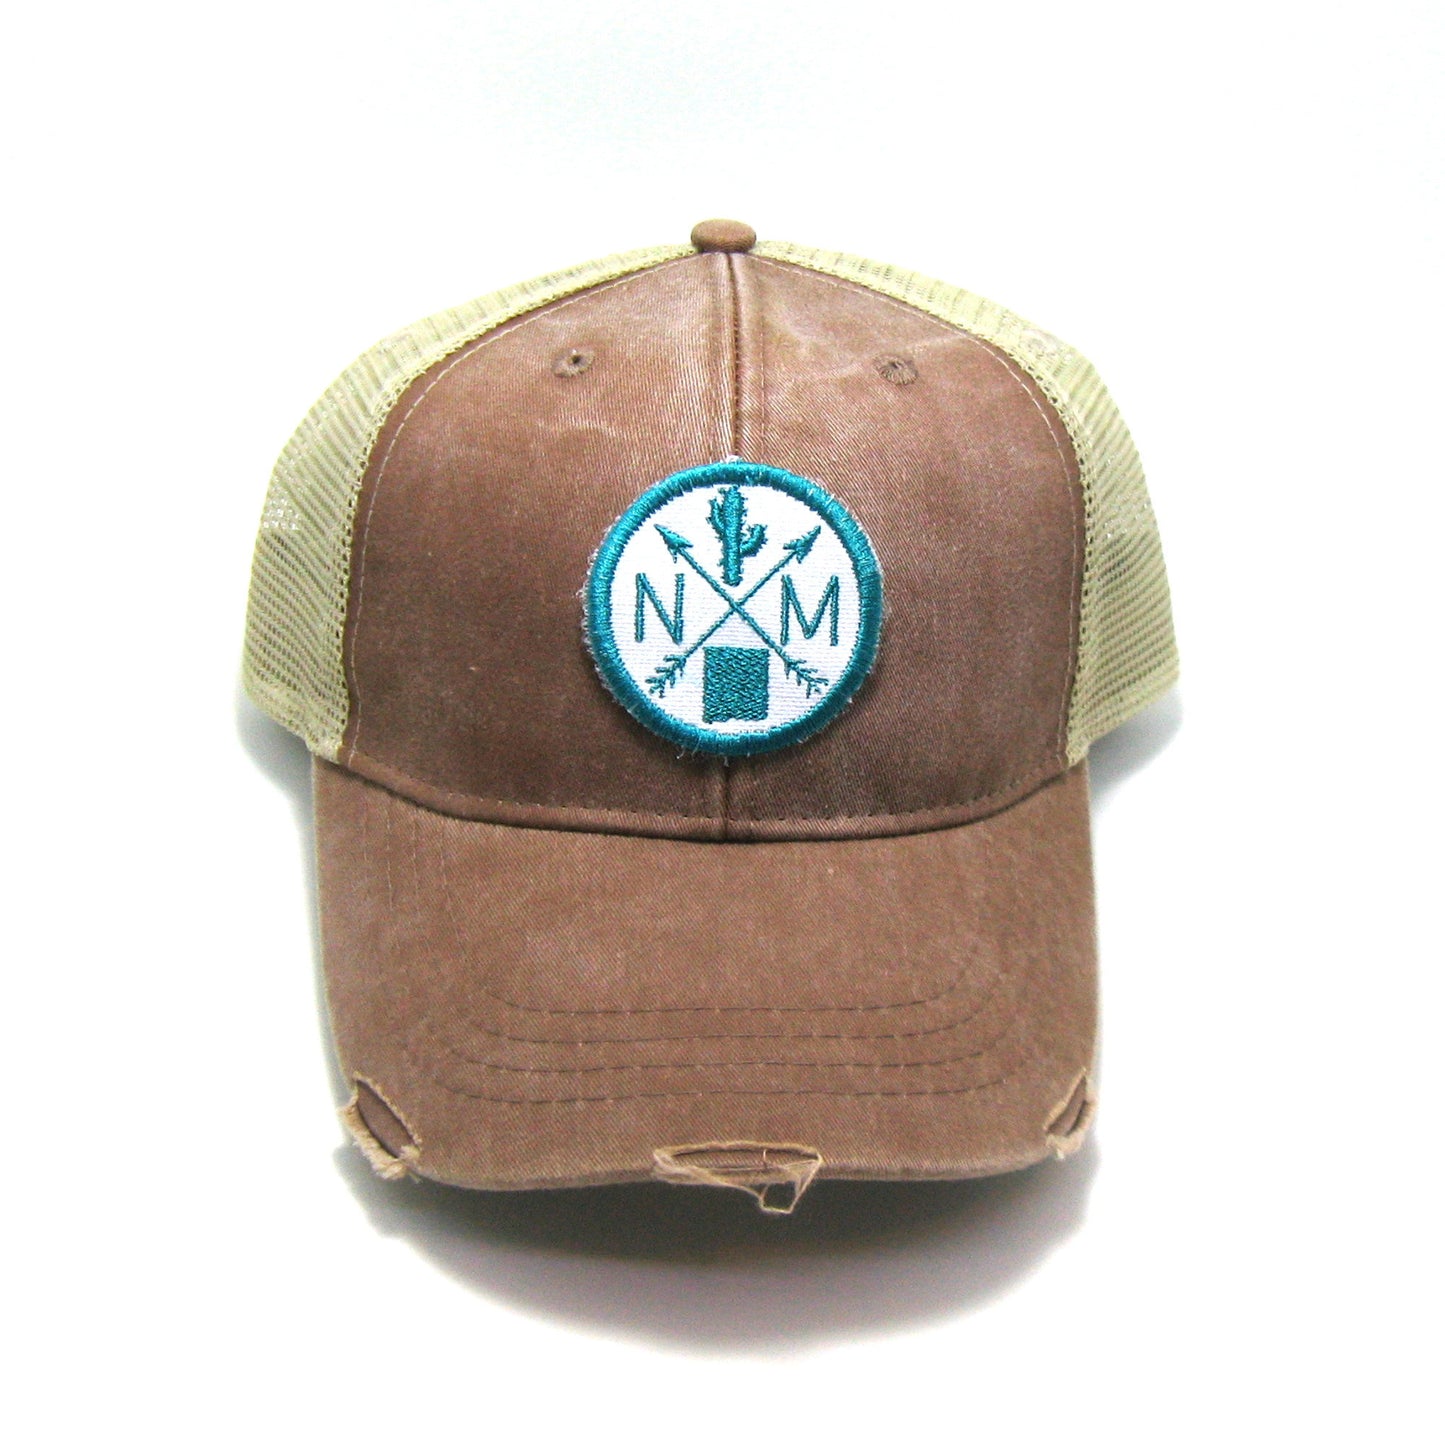 New Mexico Hat - Distressed Snapback Trucker Hat - New Mexico Arrow Compass